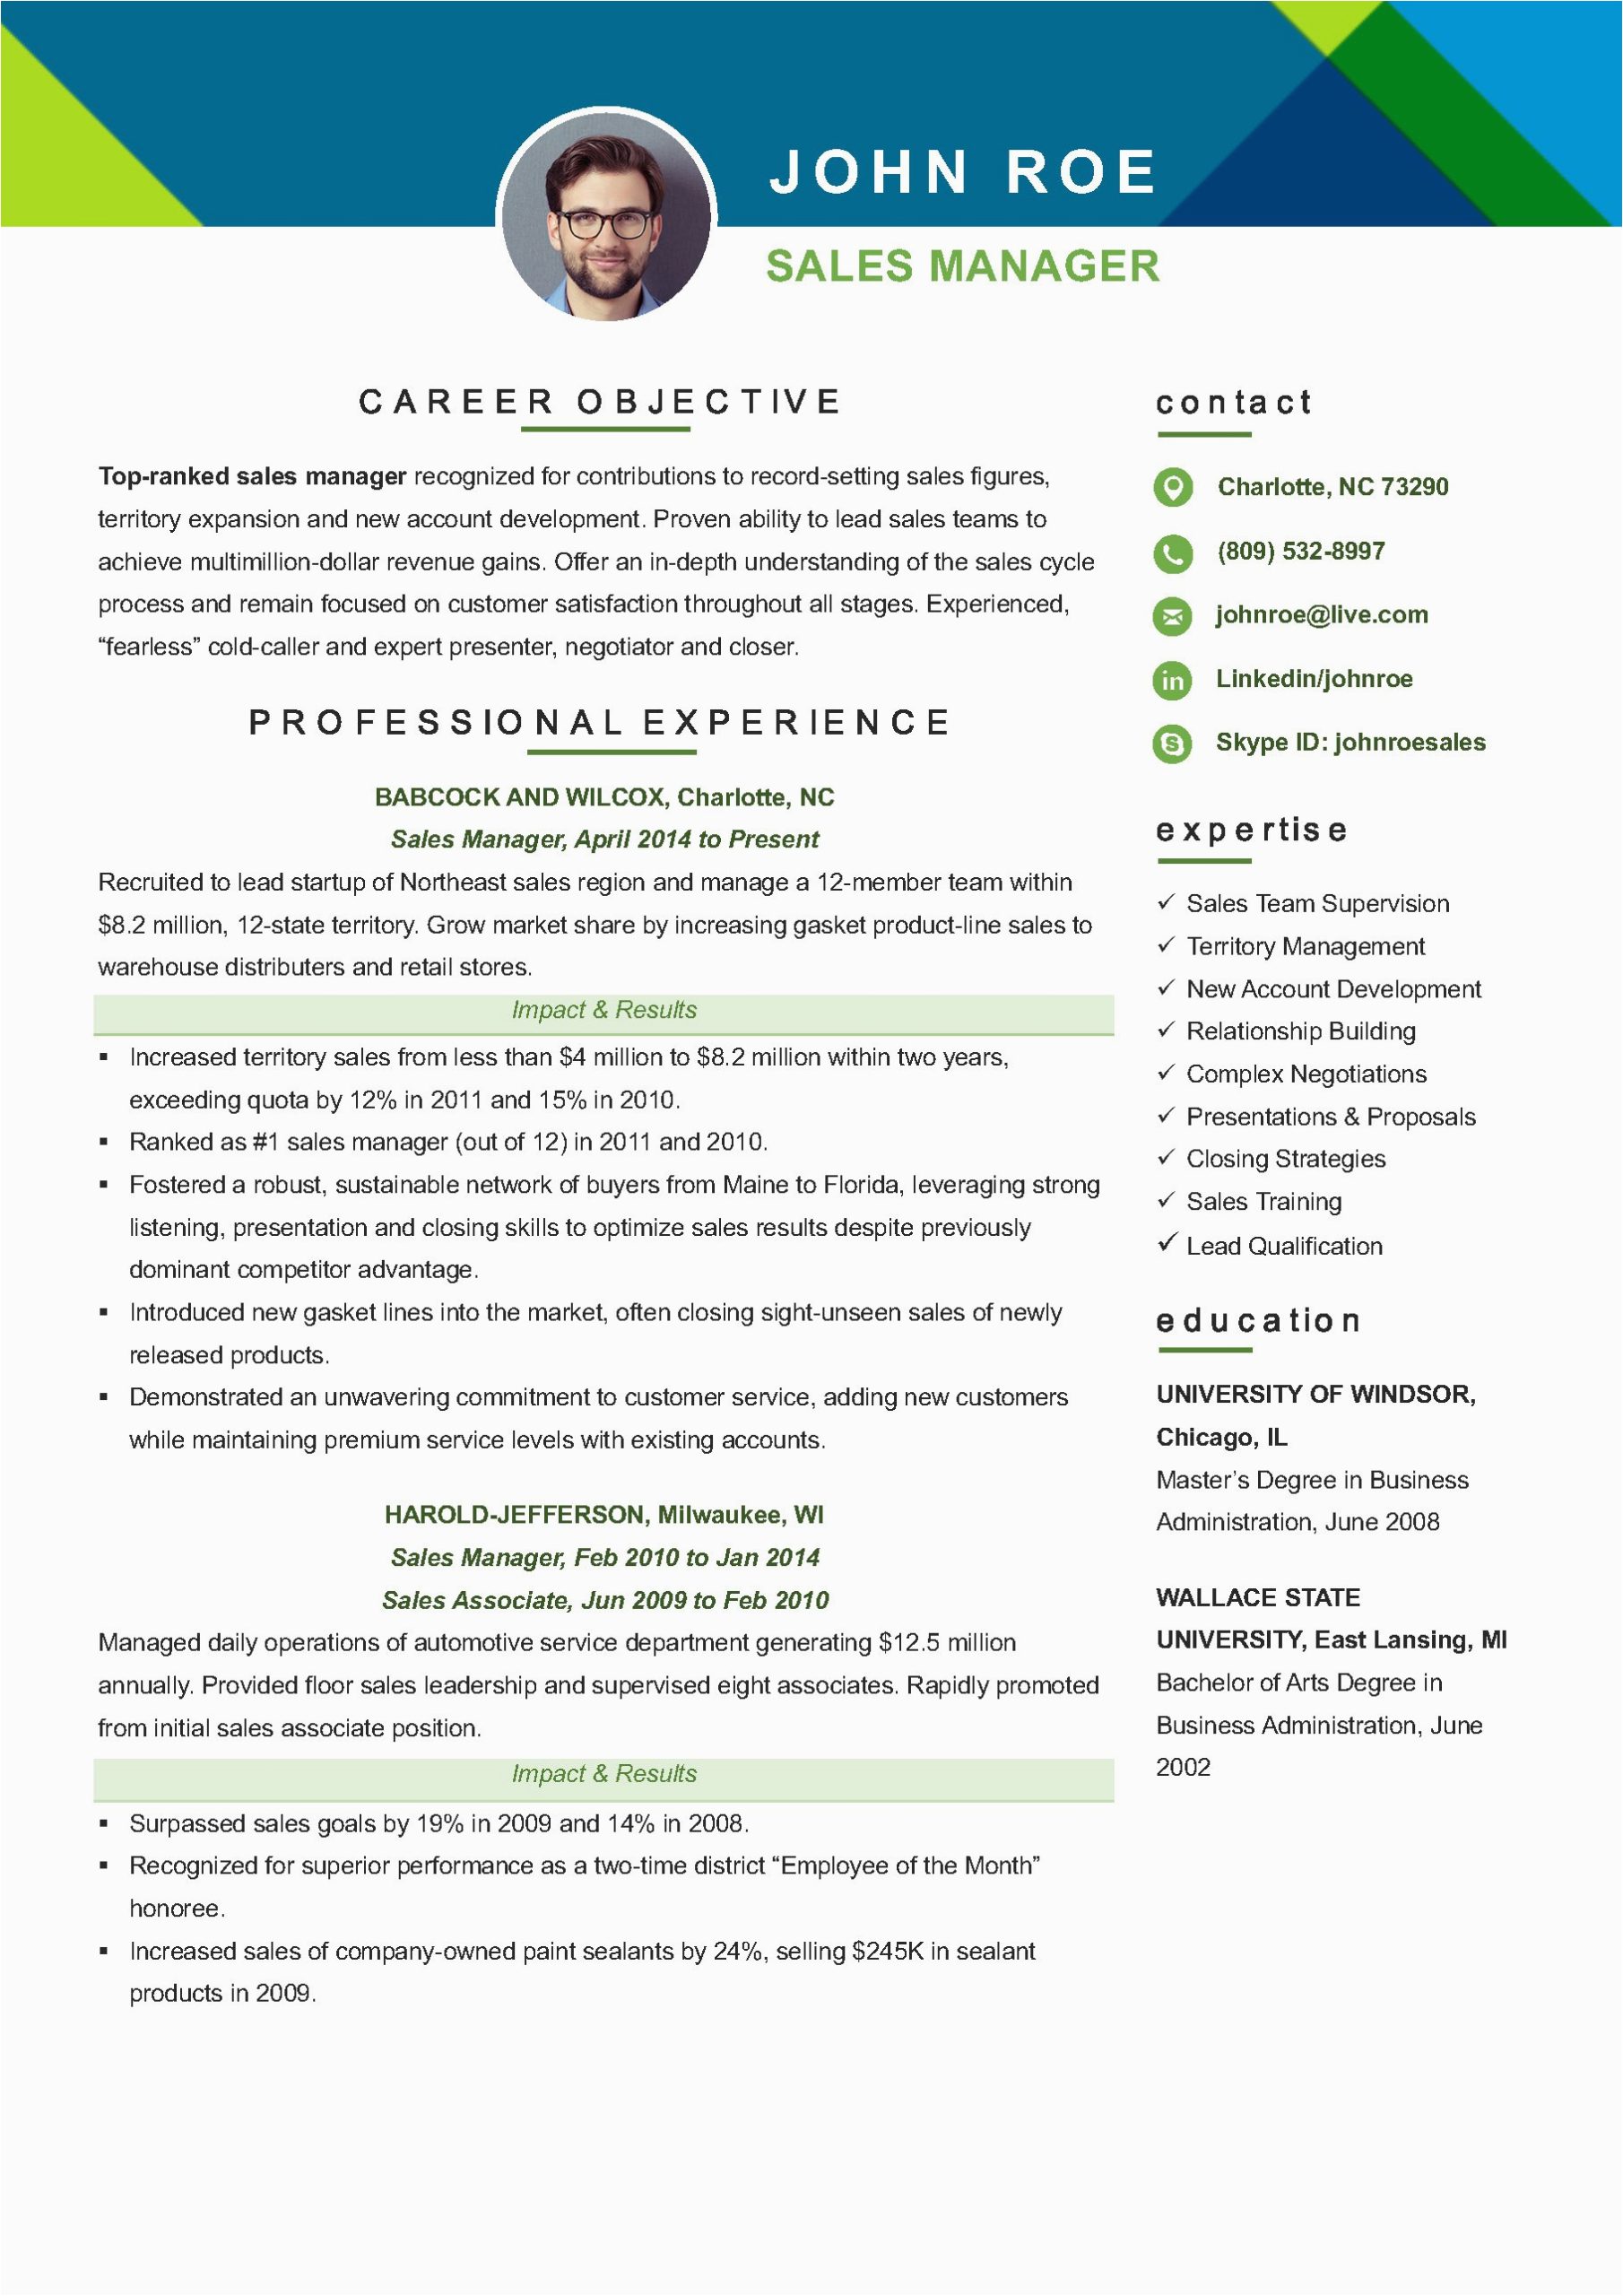 Sample Resume for Sales Manager Job Sales Manager Resume Template